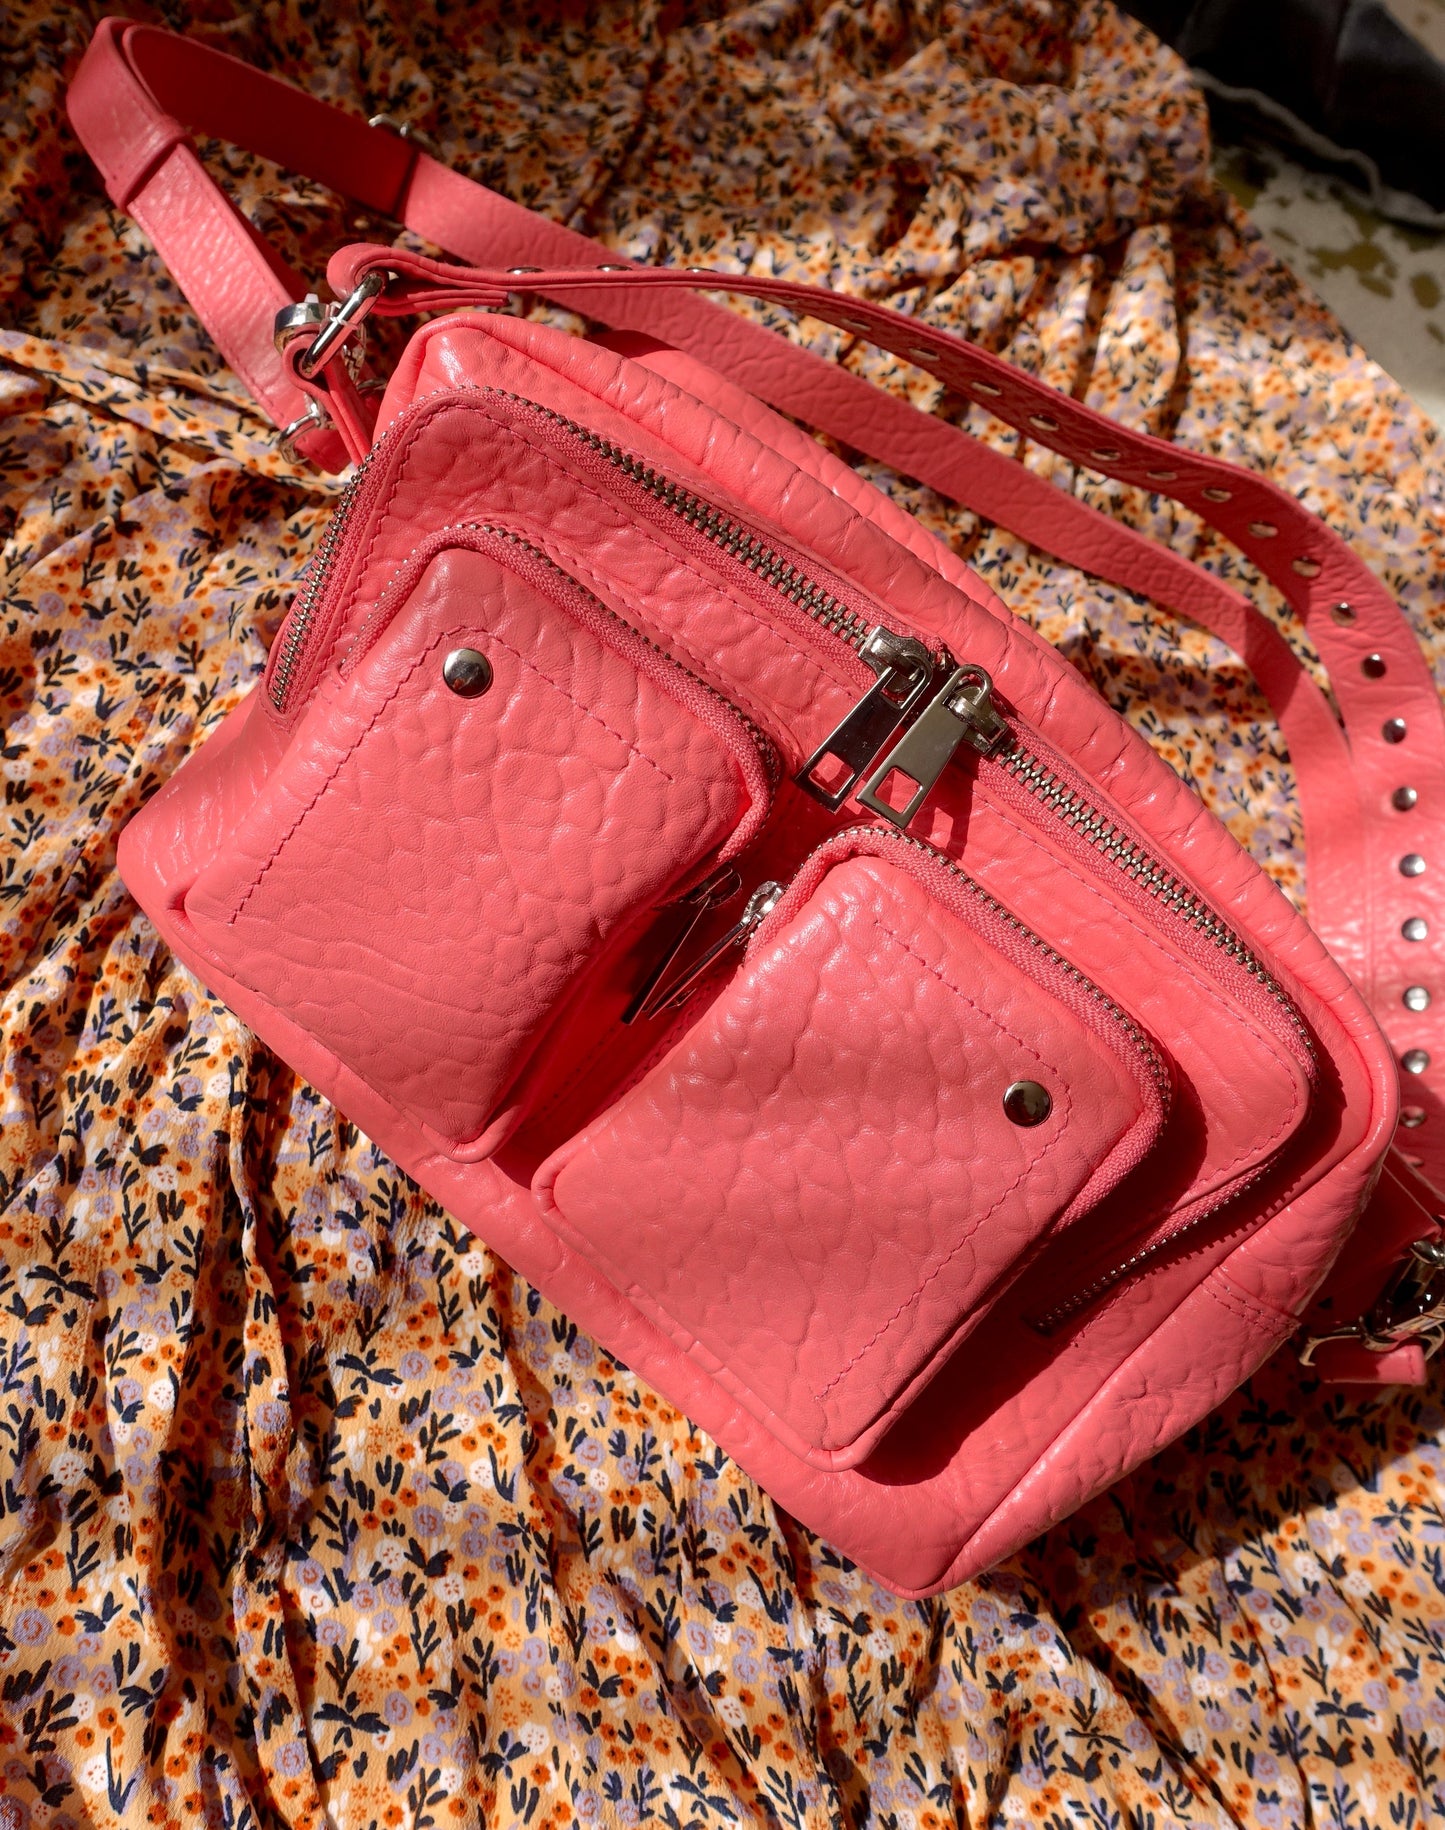 Núnoo ellie new zealand leather coral pink